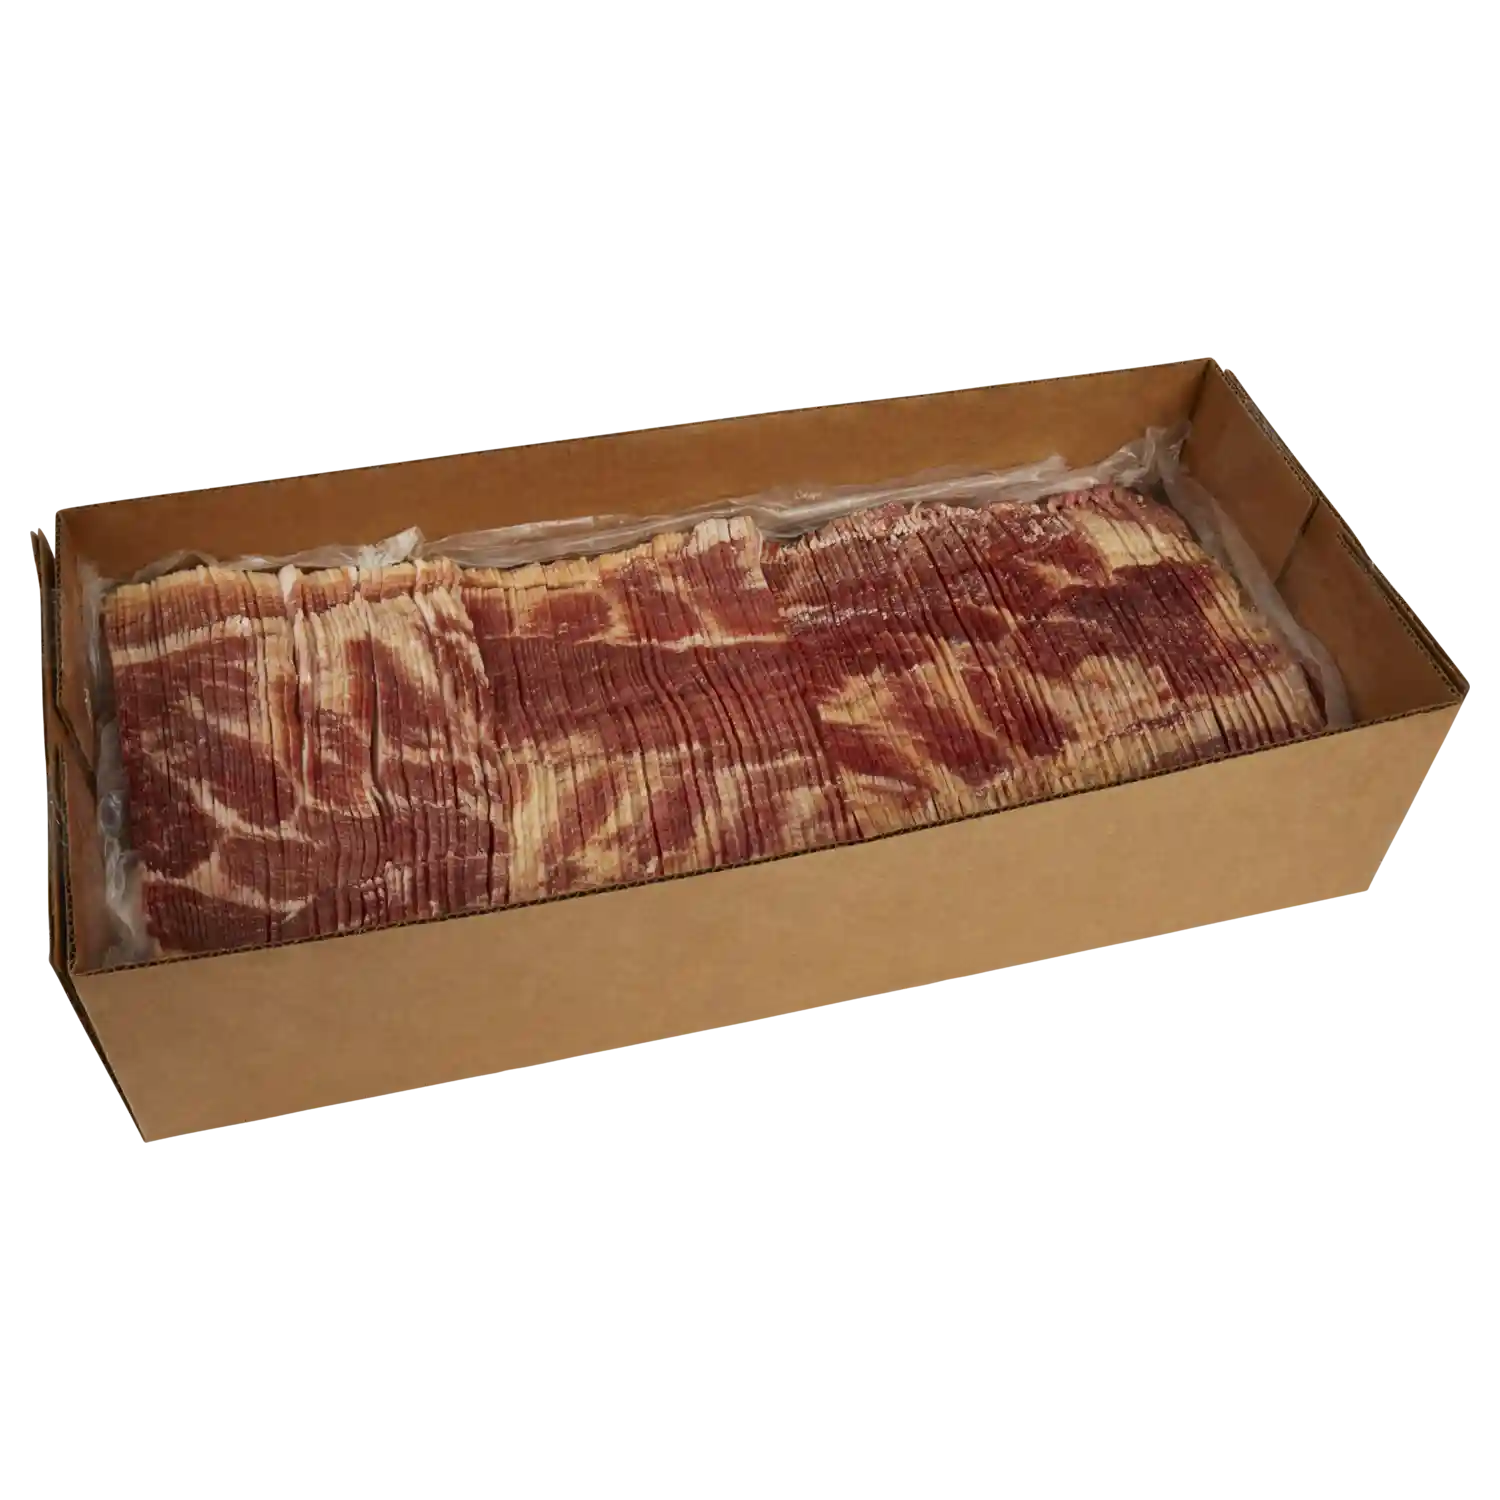 Wright® Brand Naturally Hickory Smoked Thick Sliced Bacon, Bulk, 30 Lbs, 10-14 Slices per Pound, Frozen_image_41